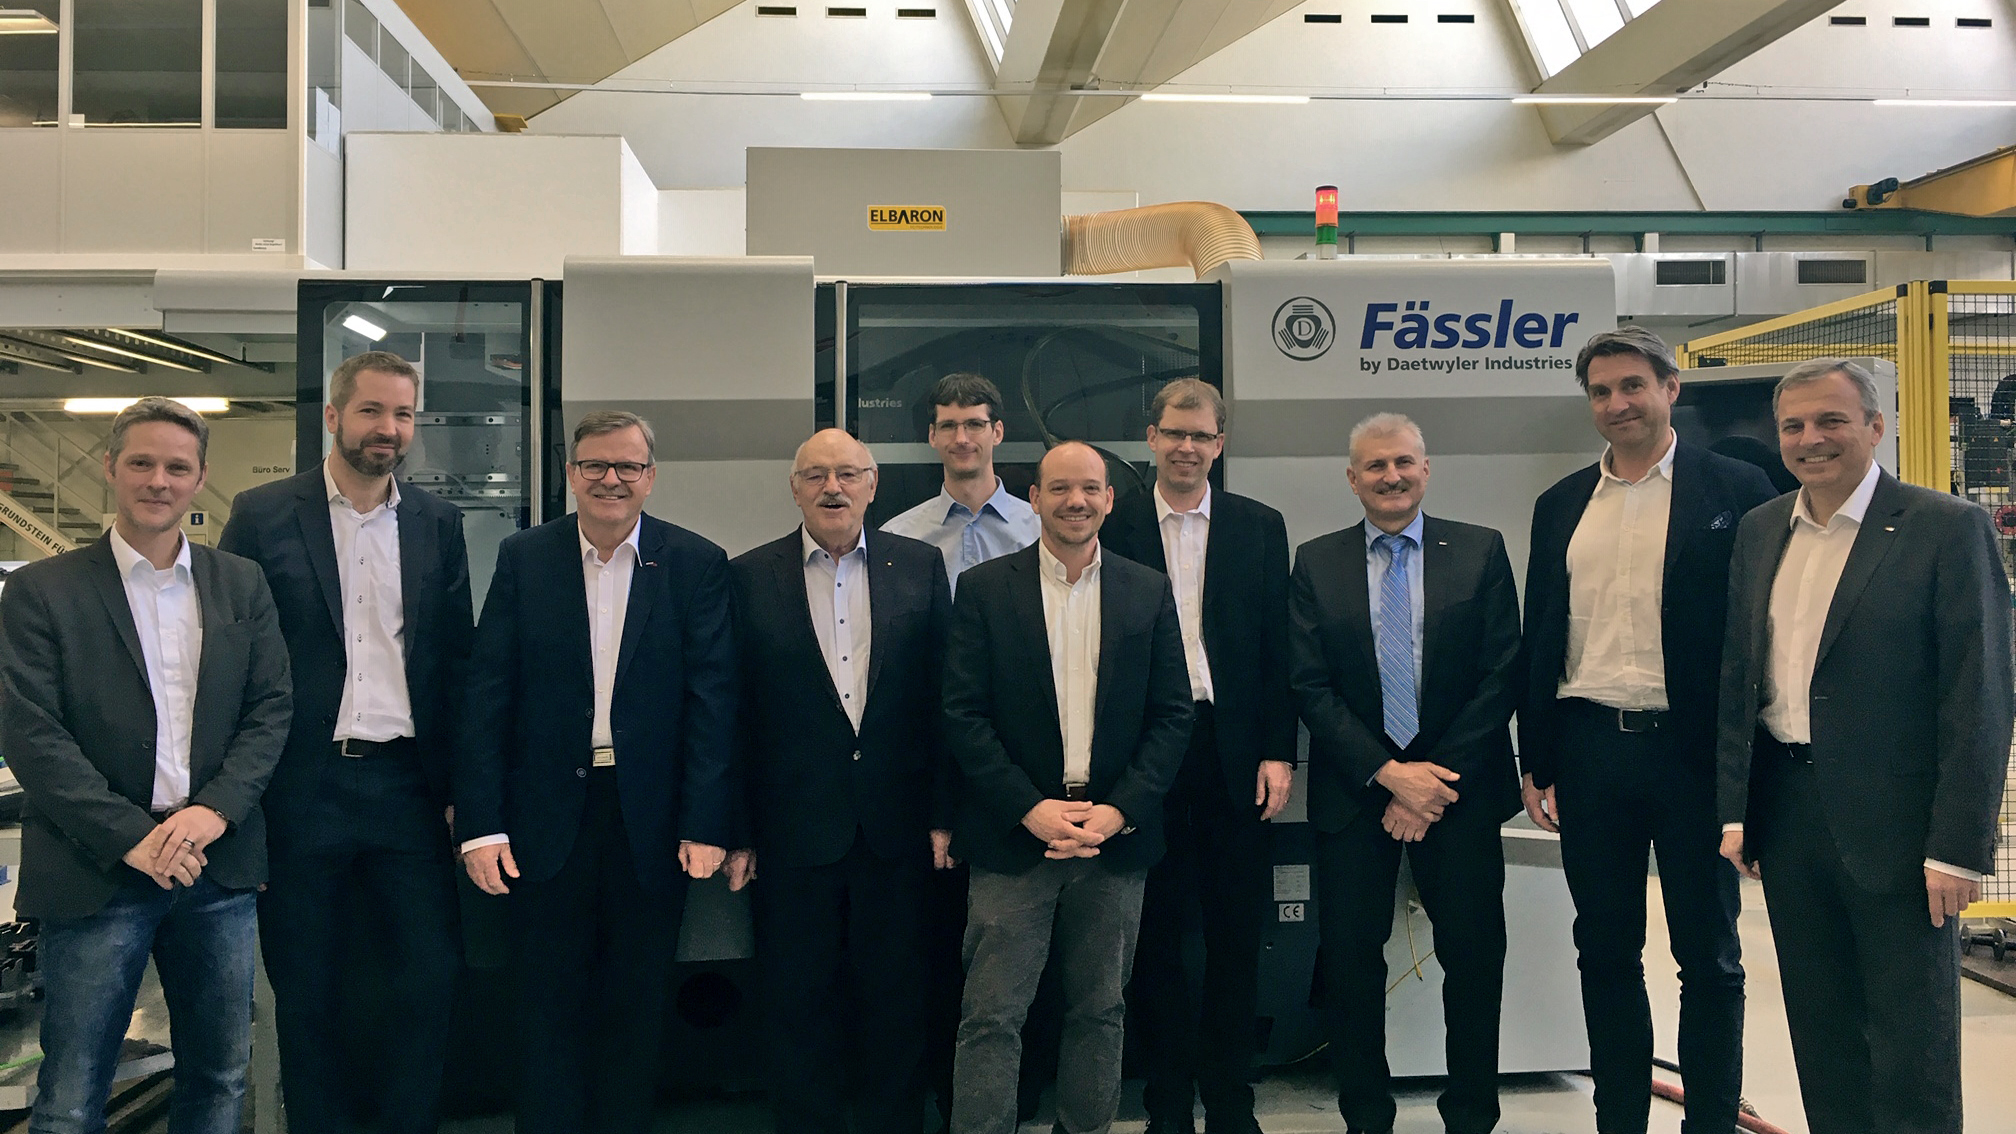 Gleason to Acquire Faessler Honing Business from Daetwyler Group in an Asset Deal